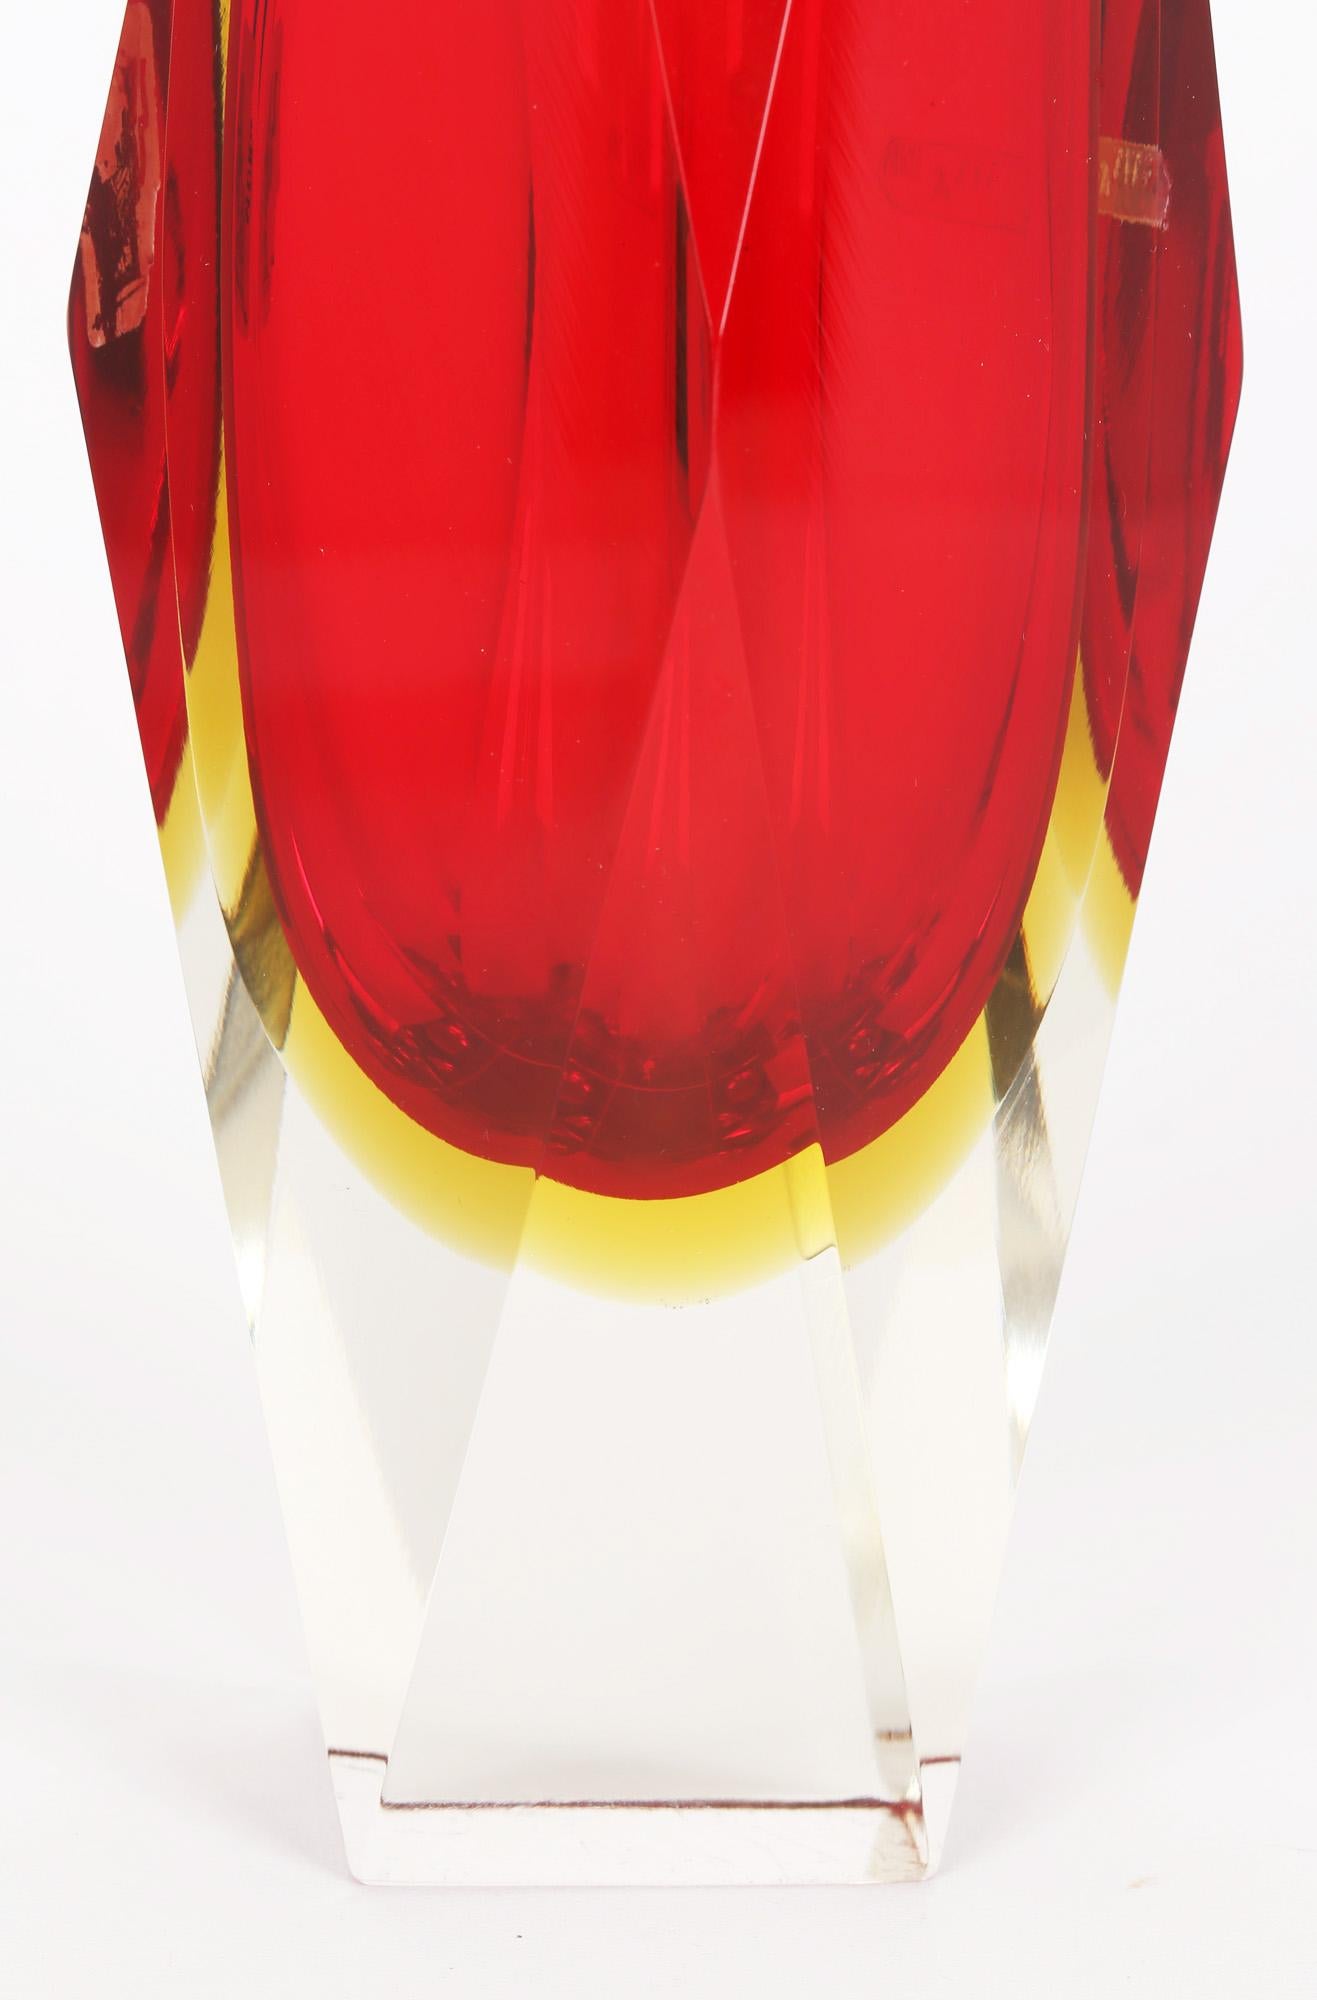 Pagnin & Bon Italian Murano Red and Yellow Sommerso Facet Cut Glass Vase For Sale 2